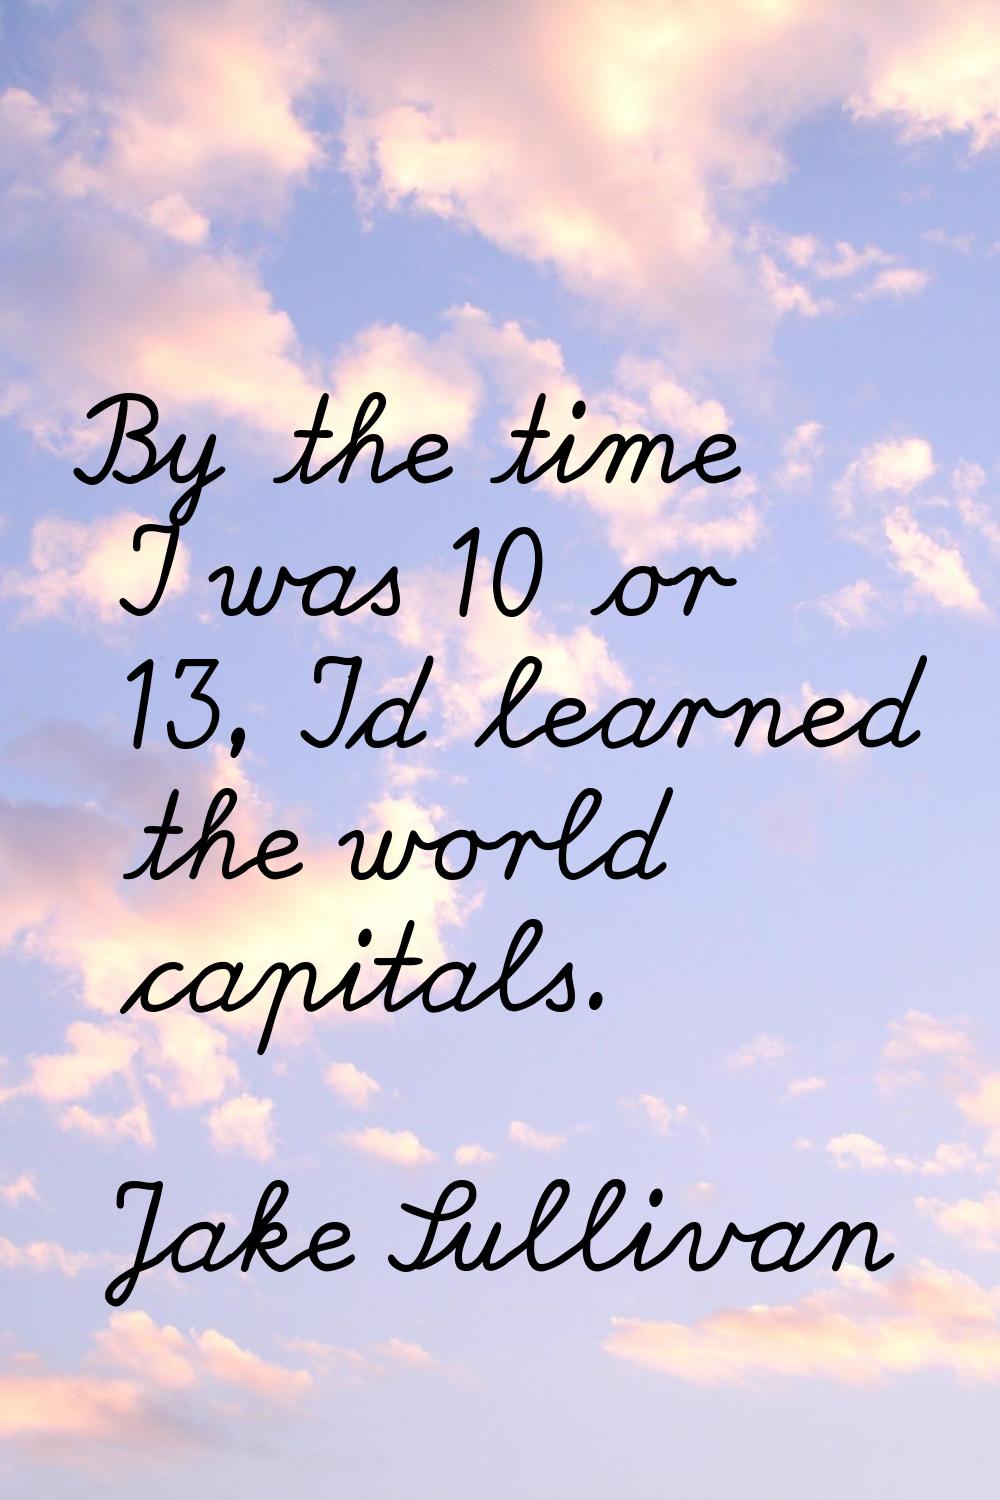 By the time I was 10 or 13, I'd learned the world capitals.